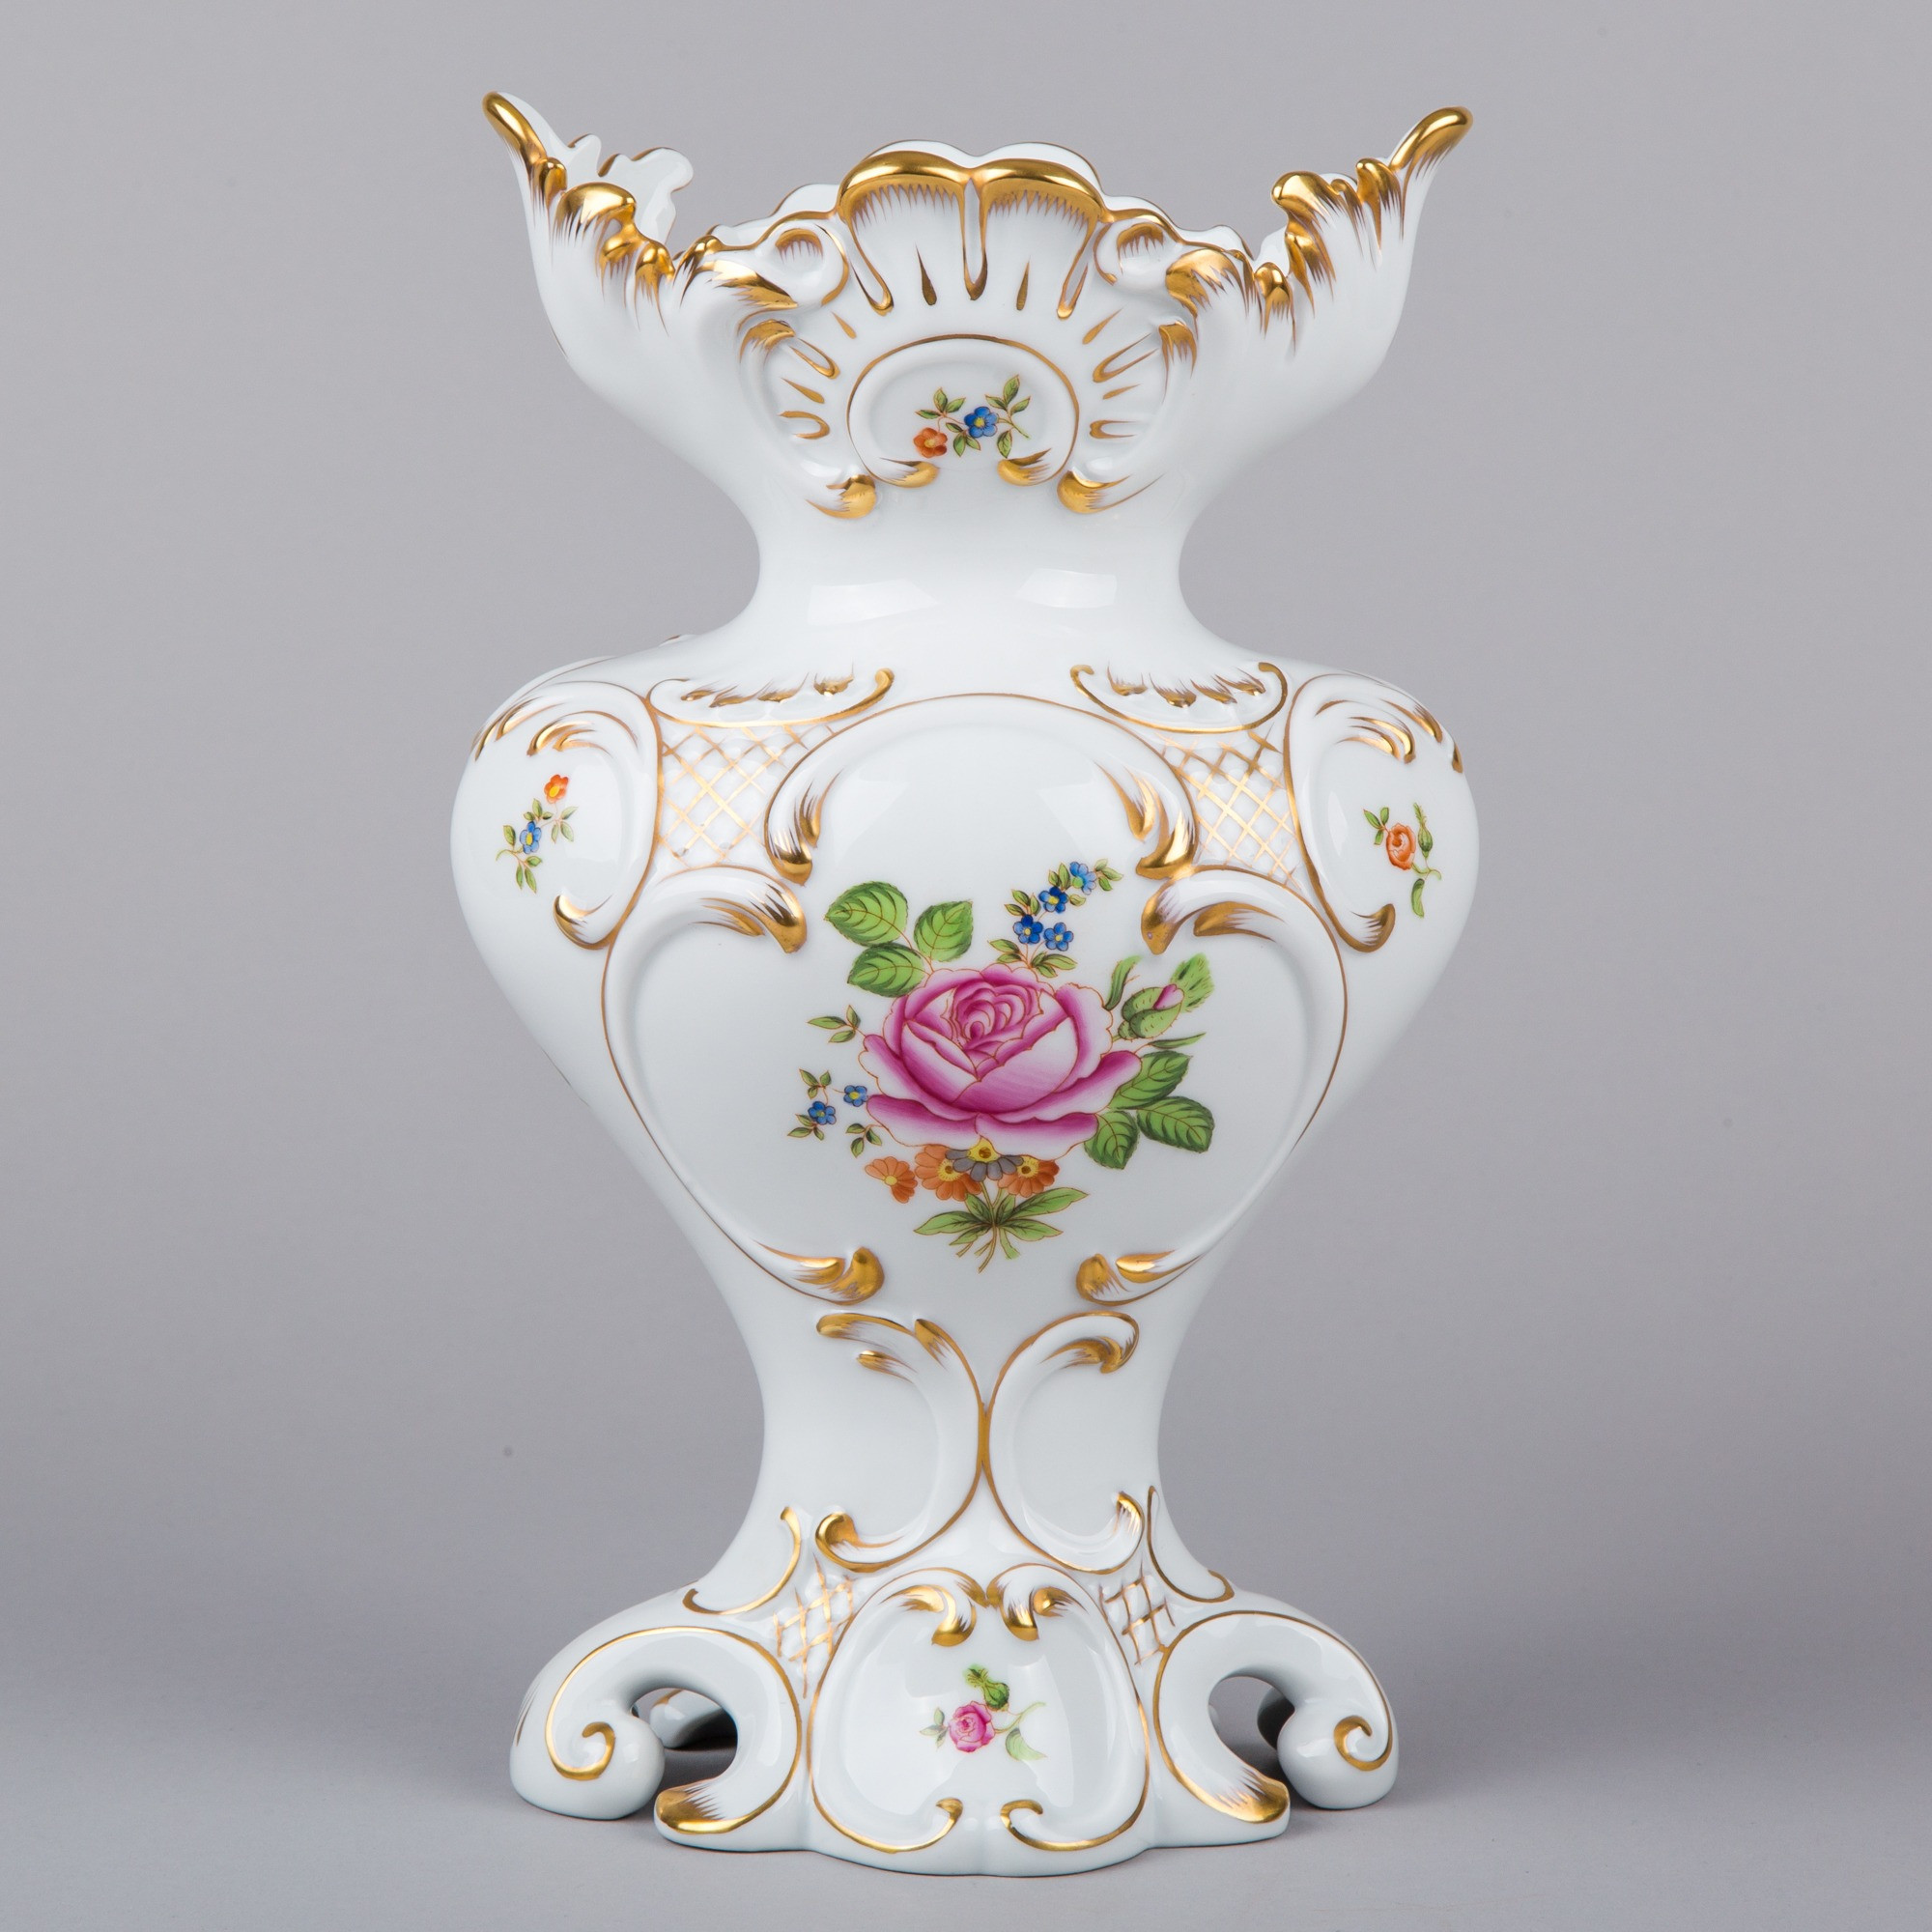 15 Stylish Herend Hvngary Hand Painted Vase 2024 free download herend hvngary hand painted vase of herend petit bouquet de rose pattern baroque vase merops collections regarding herend petit bouquet de rose pattern baroque vase